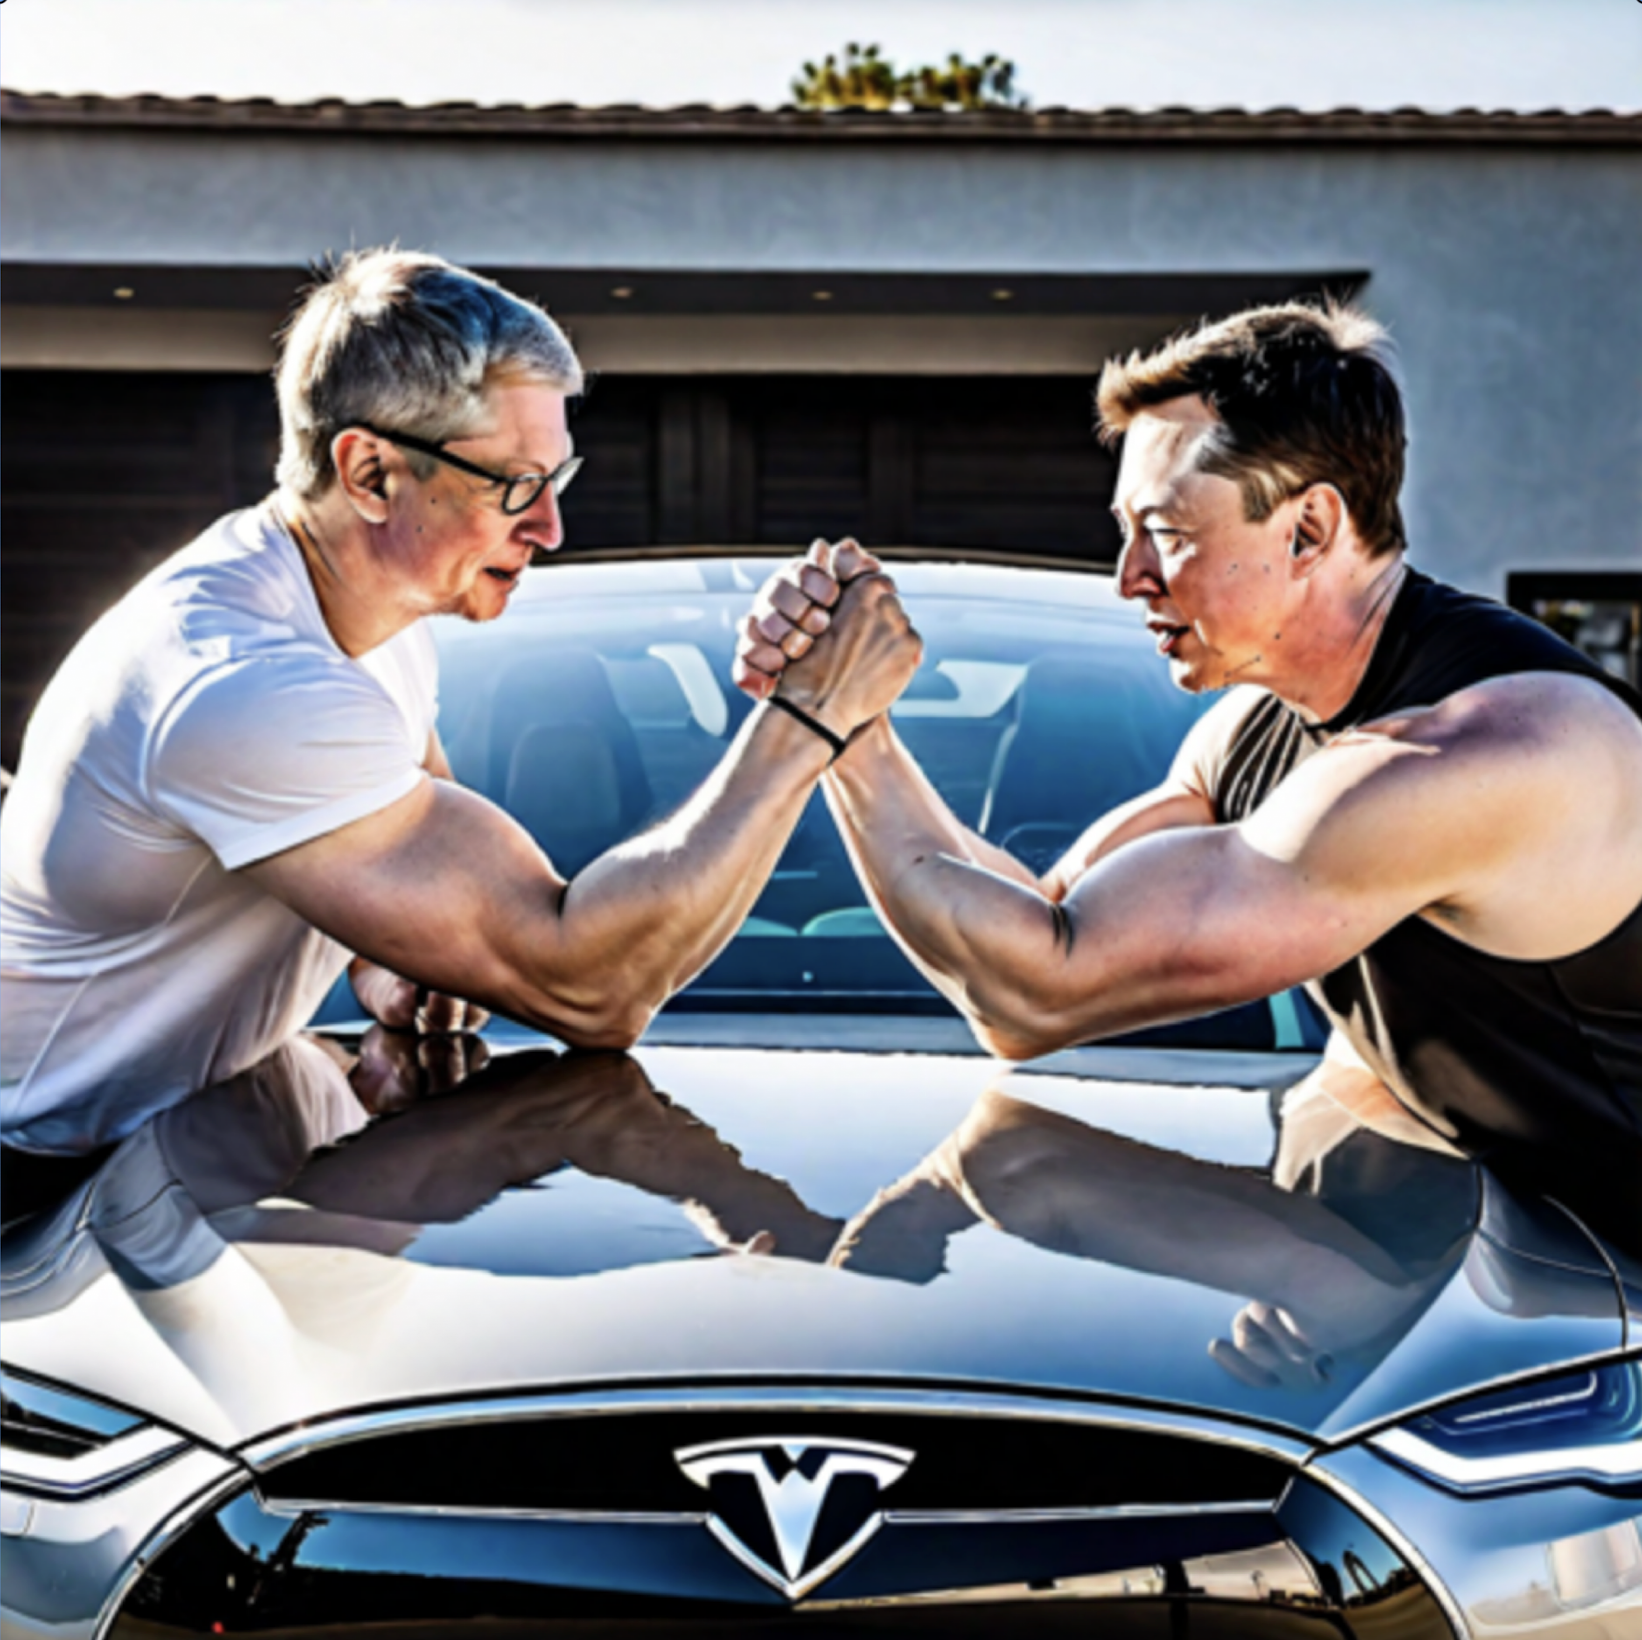 Tesla's Disruptive Force: The Platform Business Model that Snuffed Out Apple